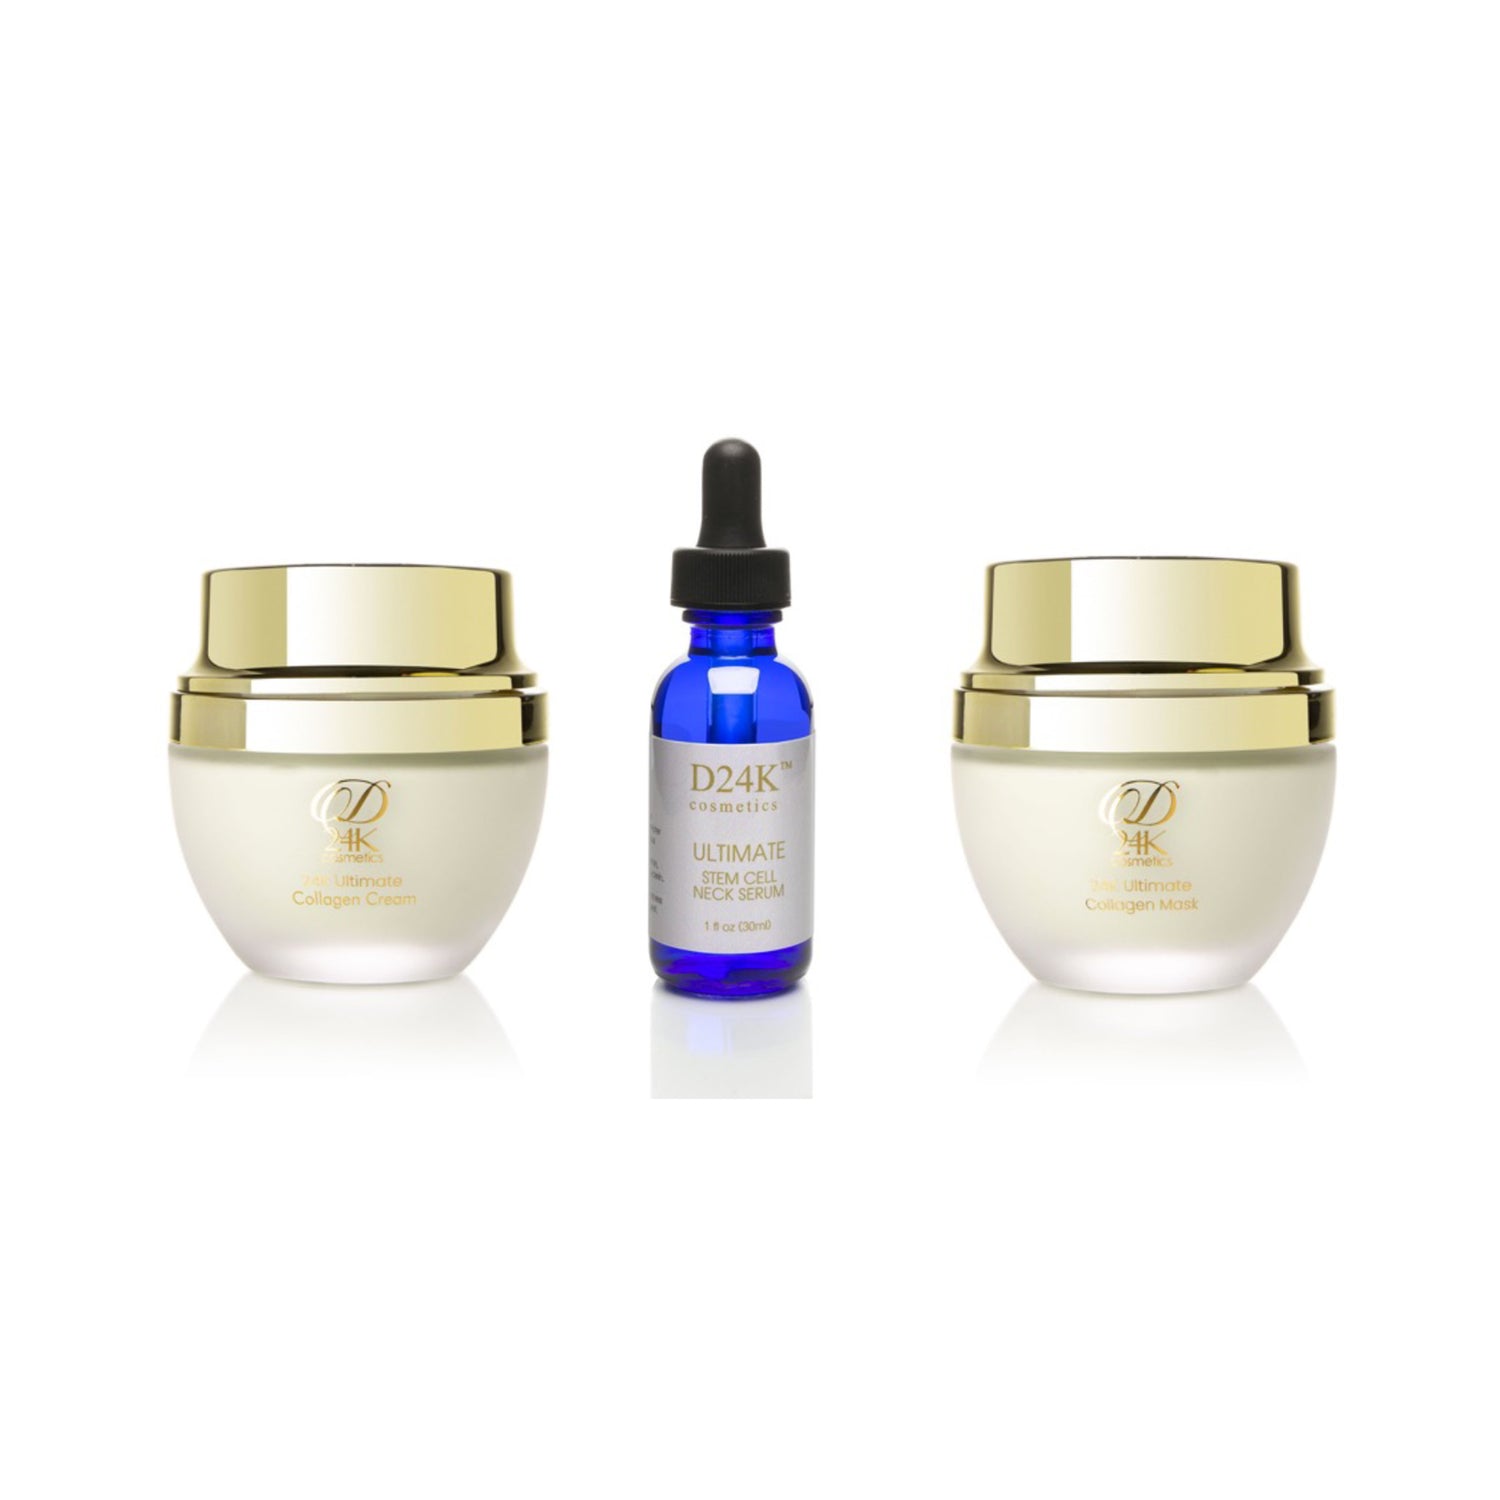 The Ultimate Skincare Set - Ultimate Stem Cell Neck Serum + 24K Ultimate Collagen Cream + 24K Ultimate Collagen Mask